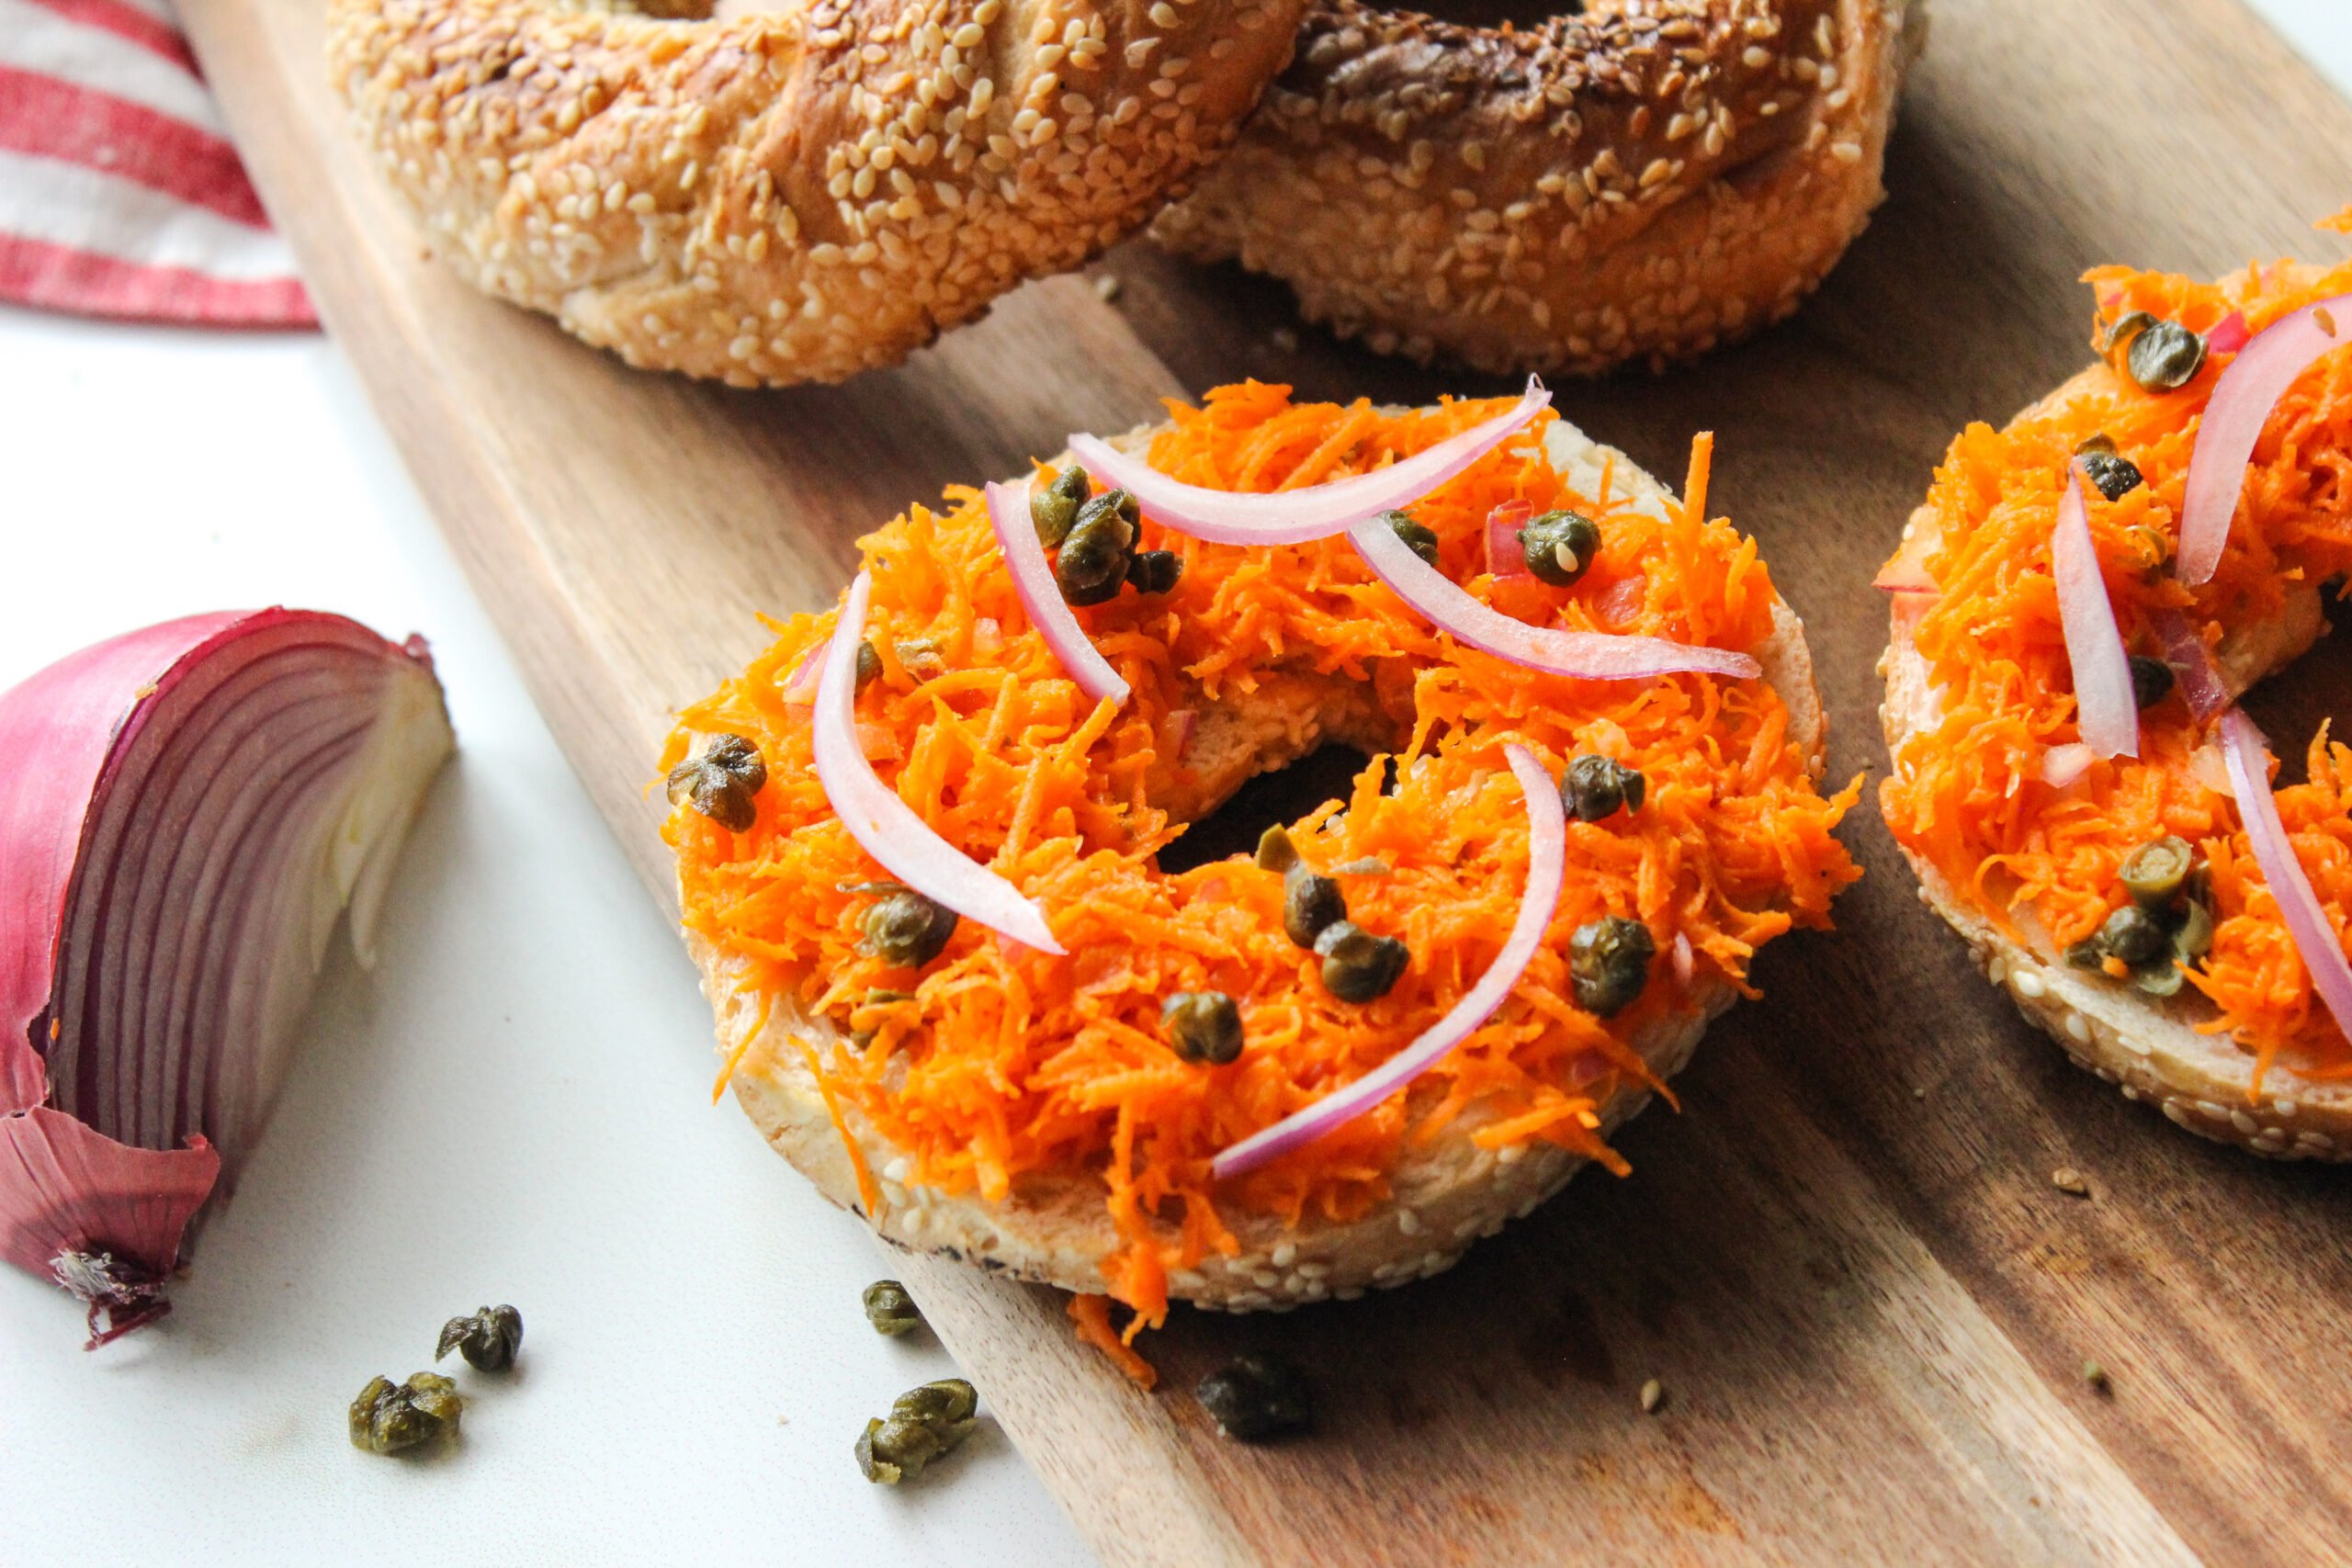 Bagels with “smoked salmon” and fried capers